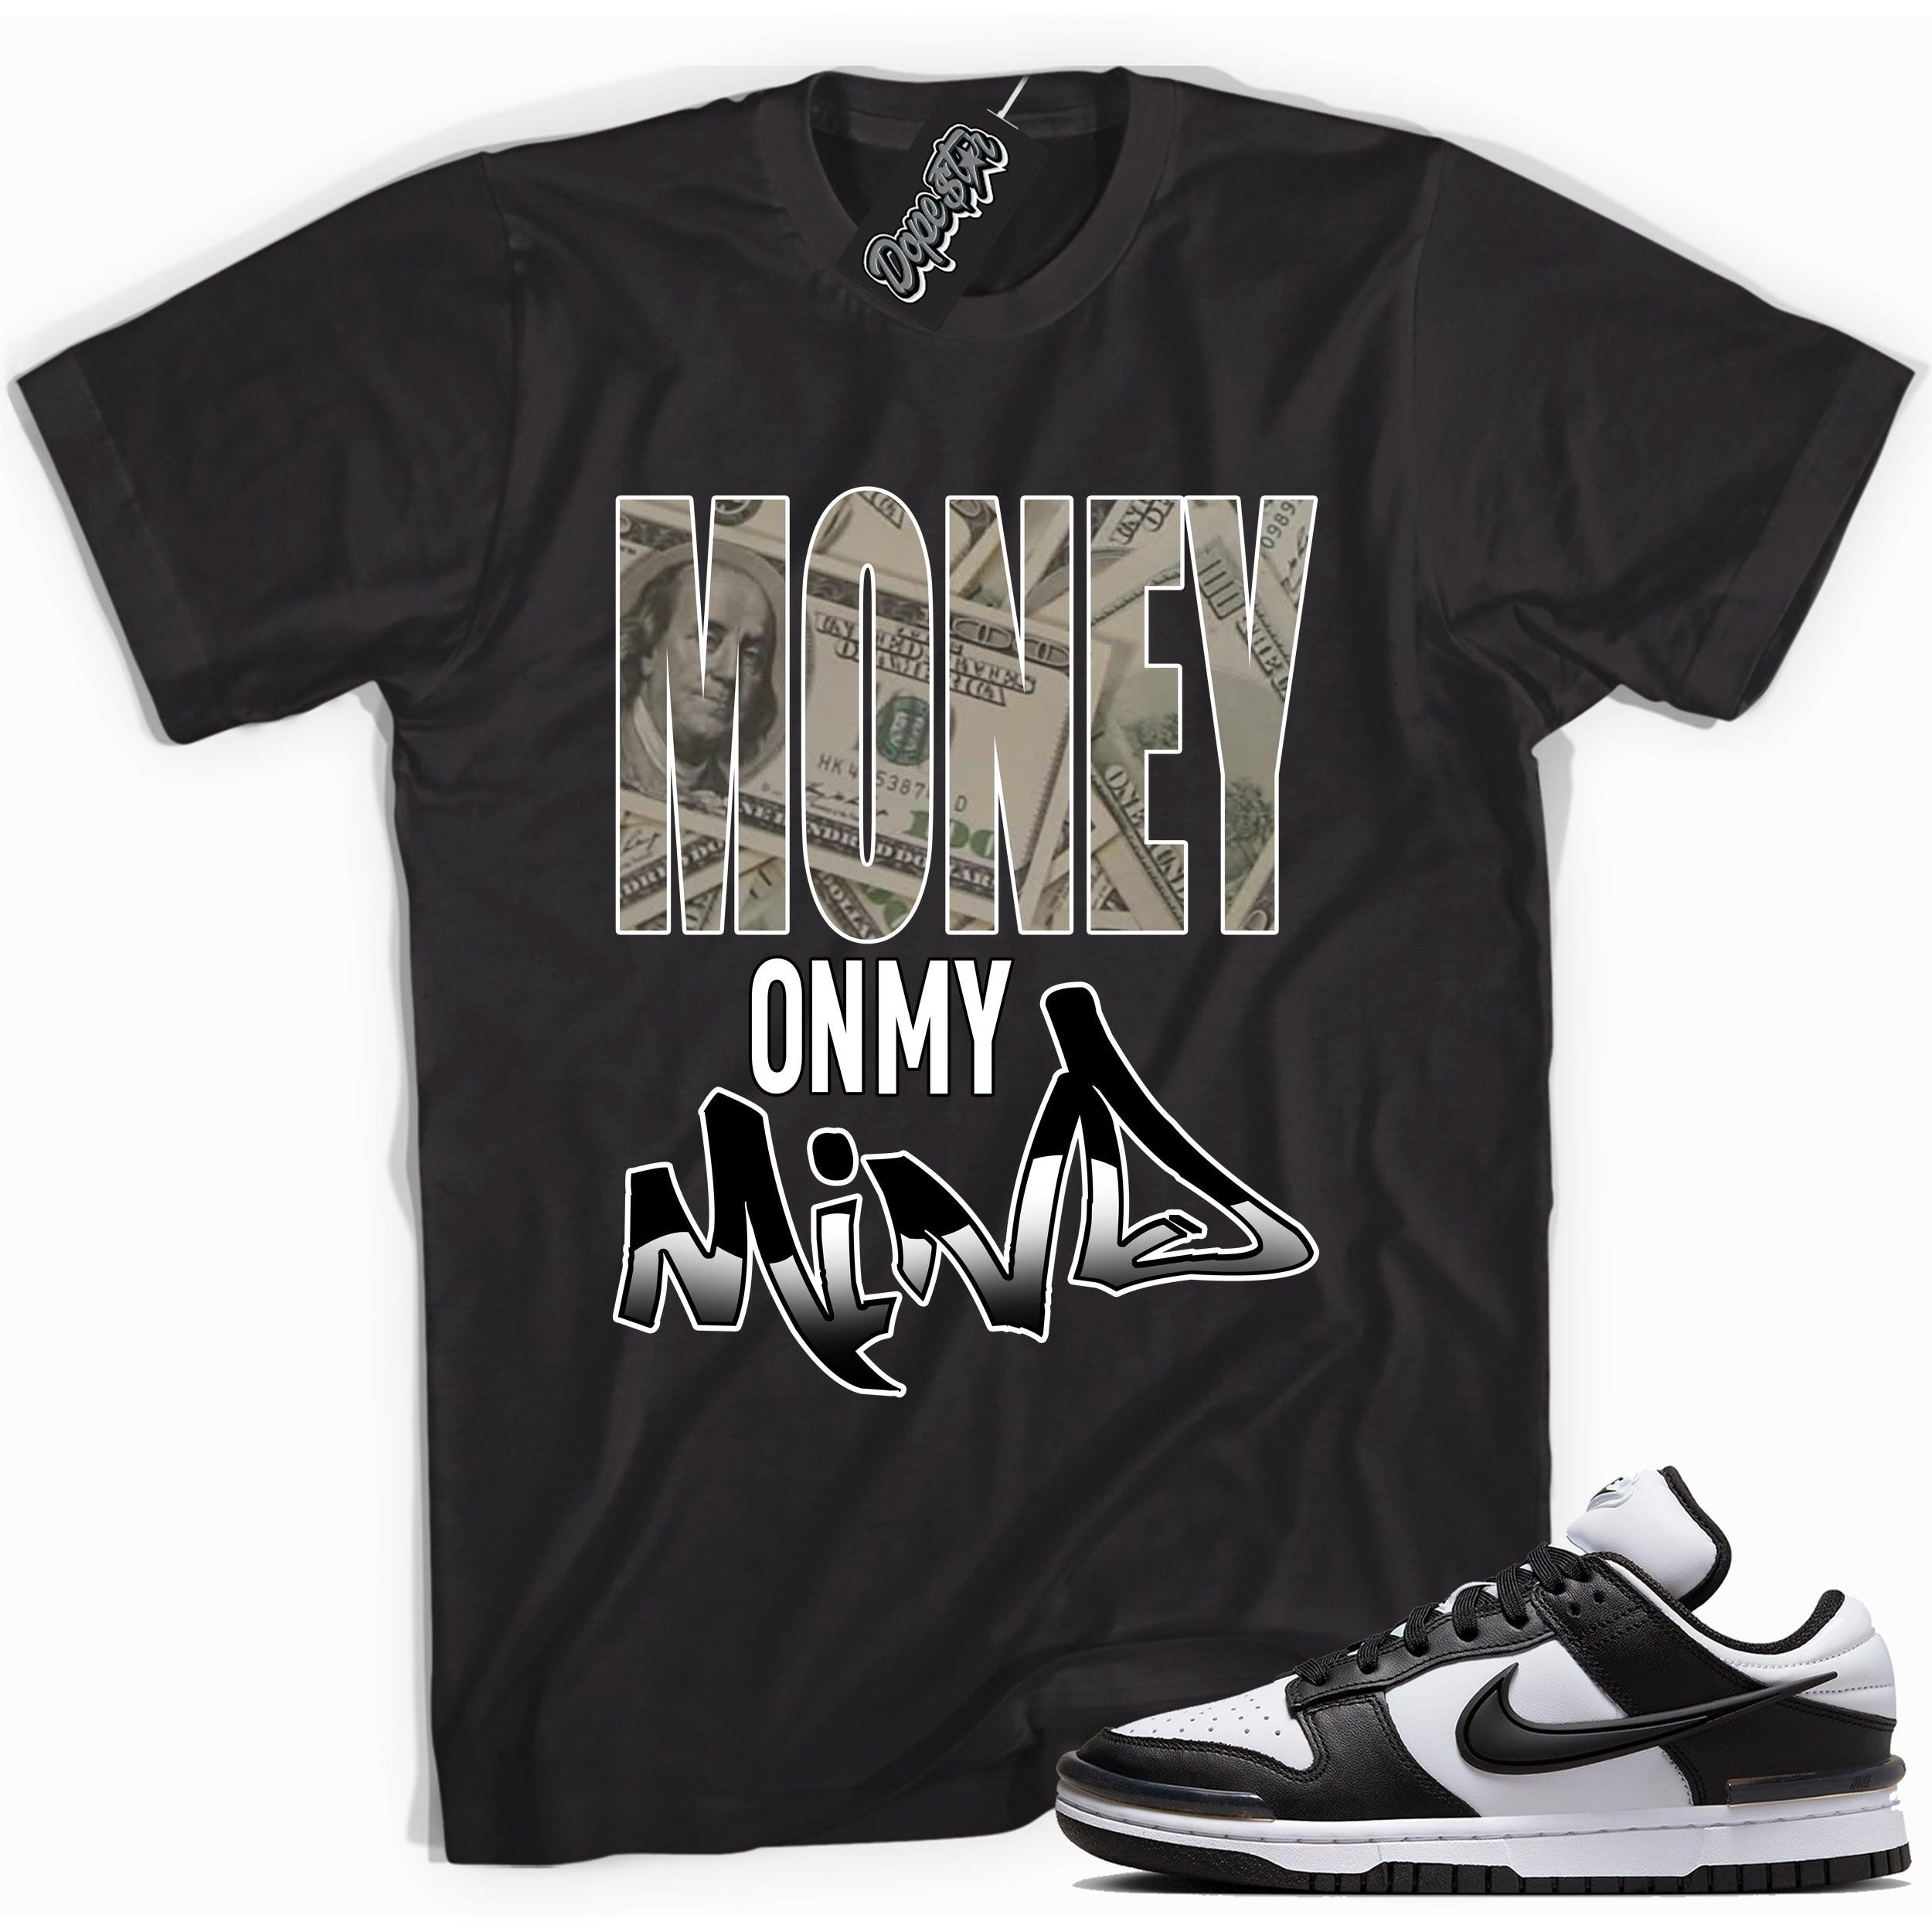 Cool black graphic tee with 'money on my mind' print, that perfectly matches Nike Dunk Low Twist Panda sneakers.